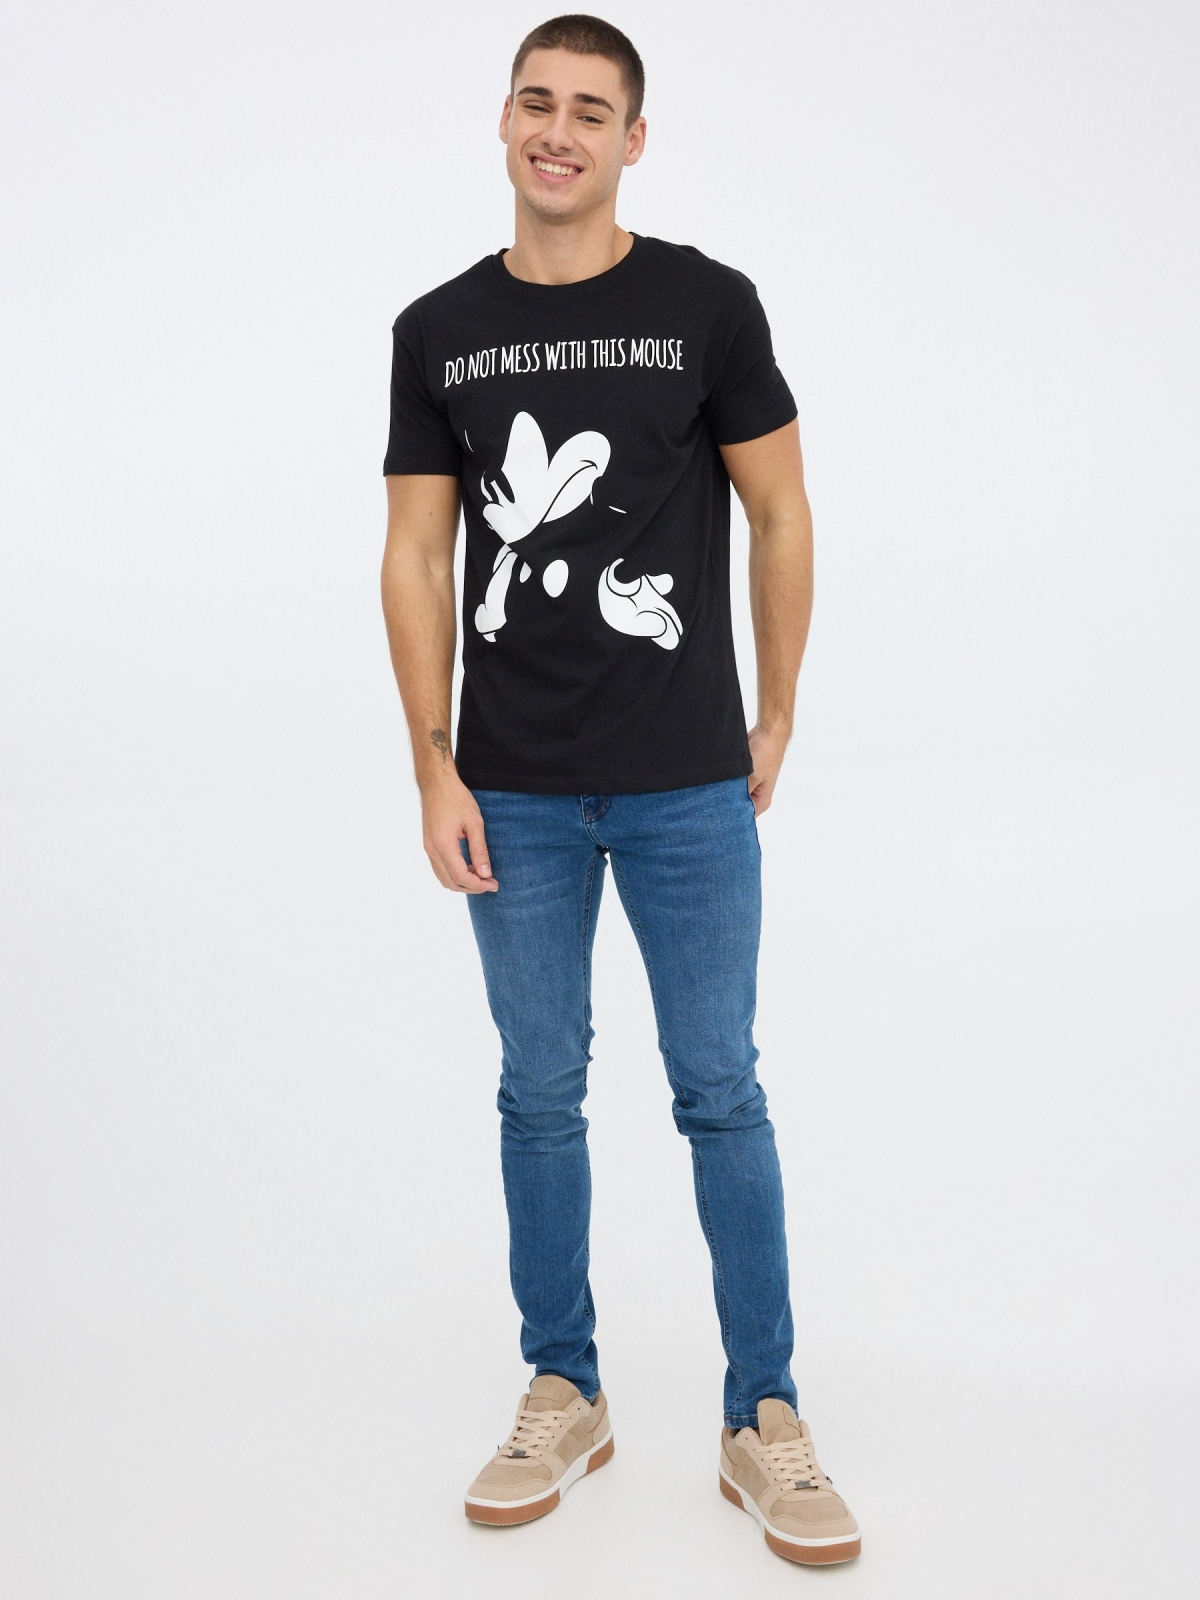 T-shirt Mickey Mouse preto vista geral frontal